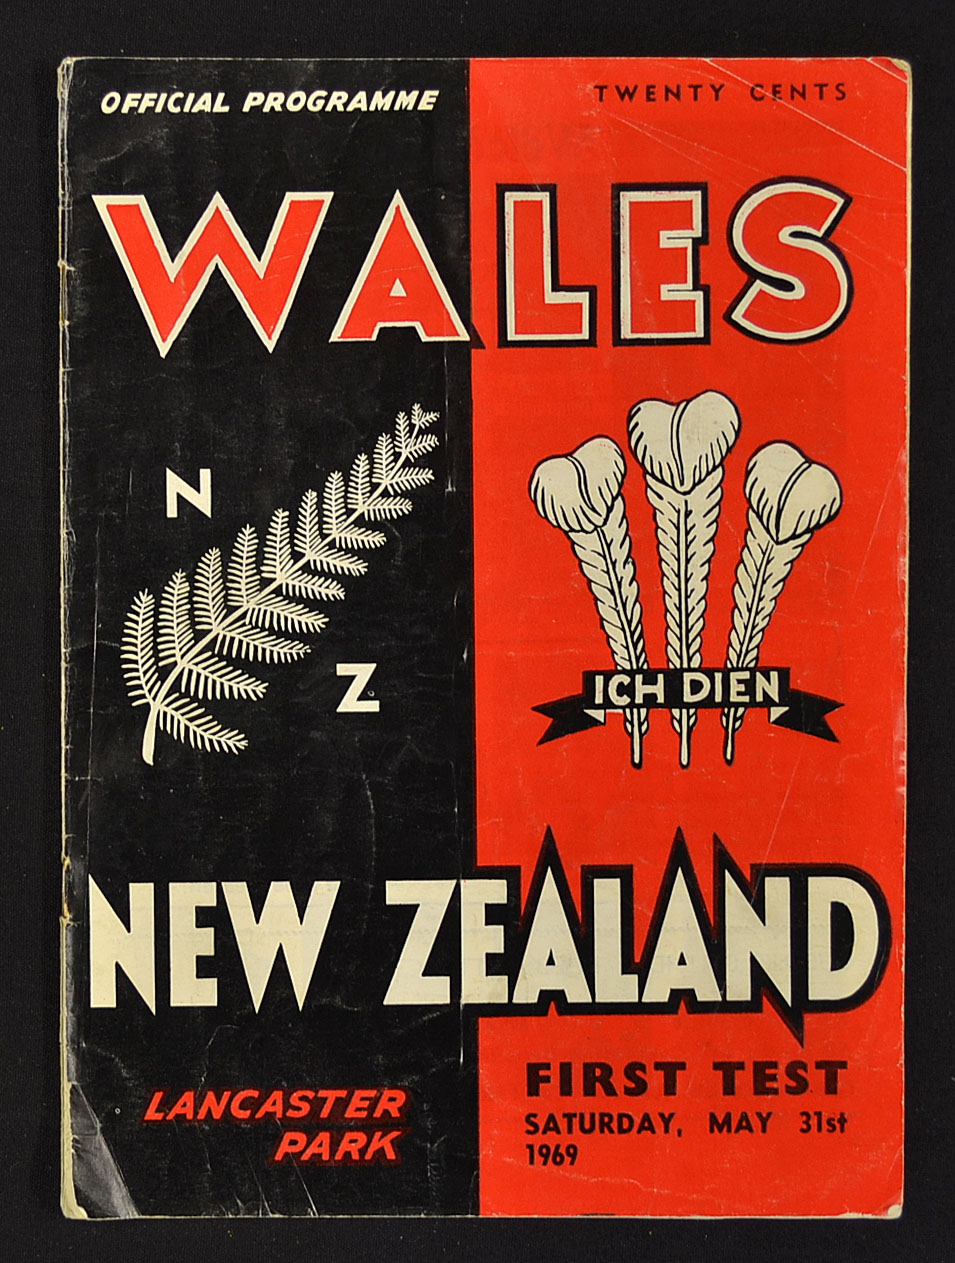 1st Test match programme (image from Mullock's Auction)